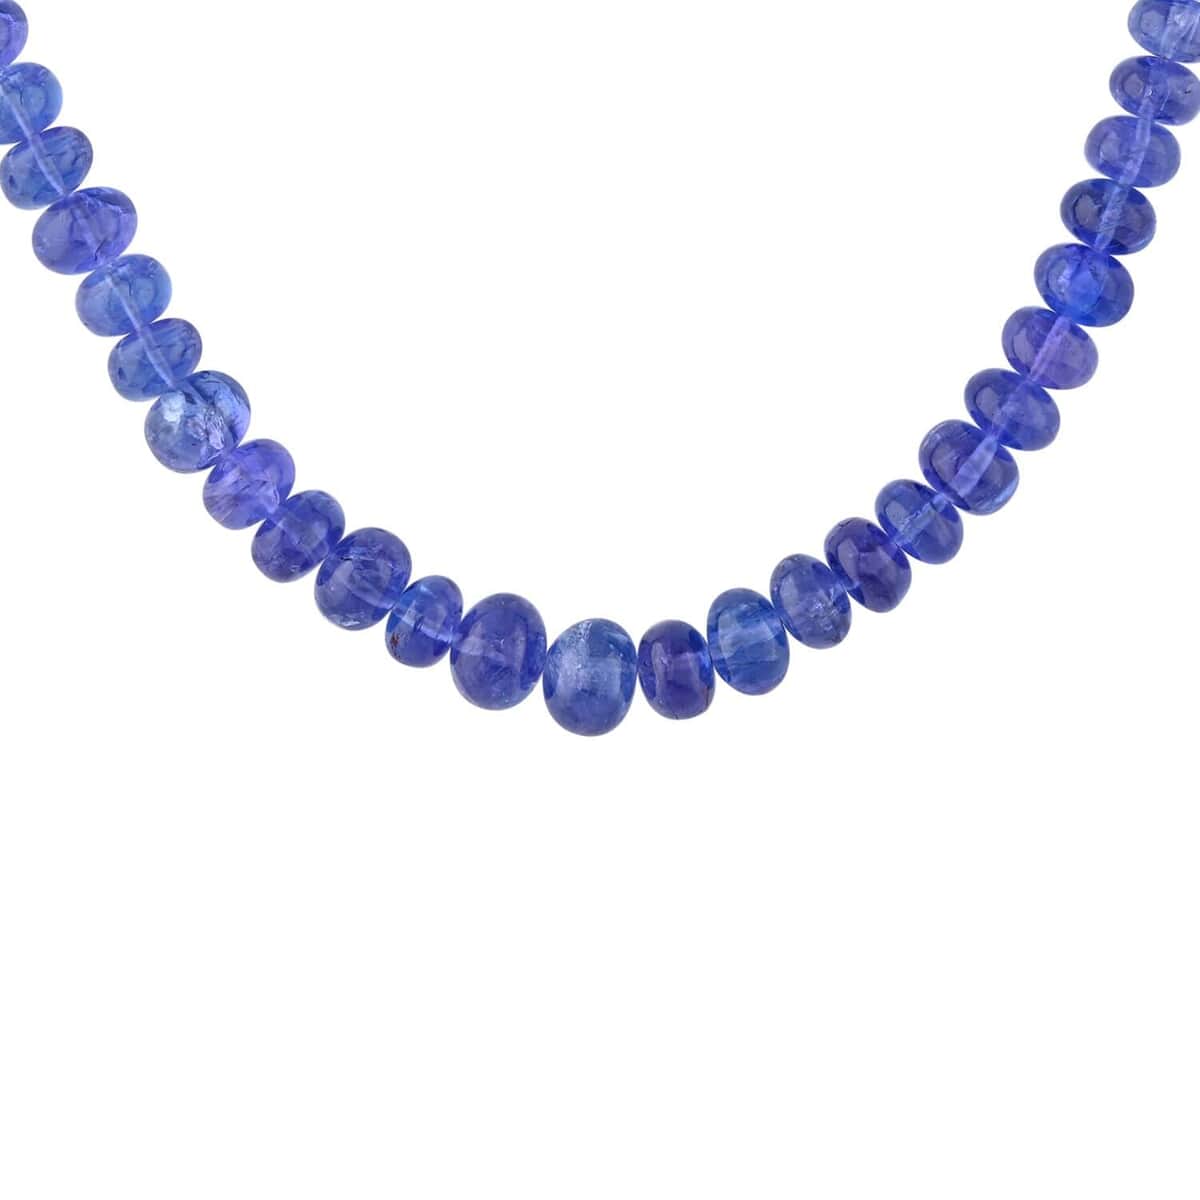 Rhapsody Certified & Appraised AAAA Tanzanite Beaded Necklace, 18 Inch Necklace in 950 Platinum, Tanzanite Jewelry For Her, Birthday Anniversary Gift 165.00 ctw image number 3